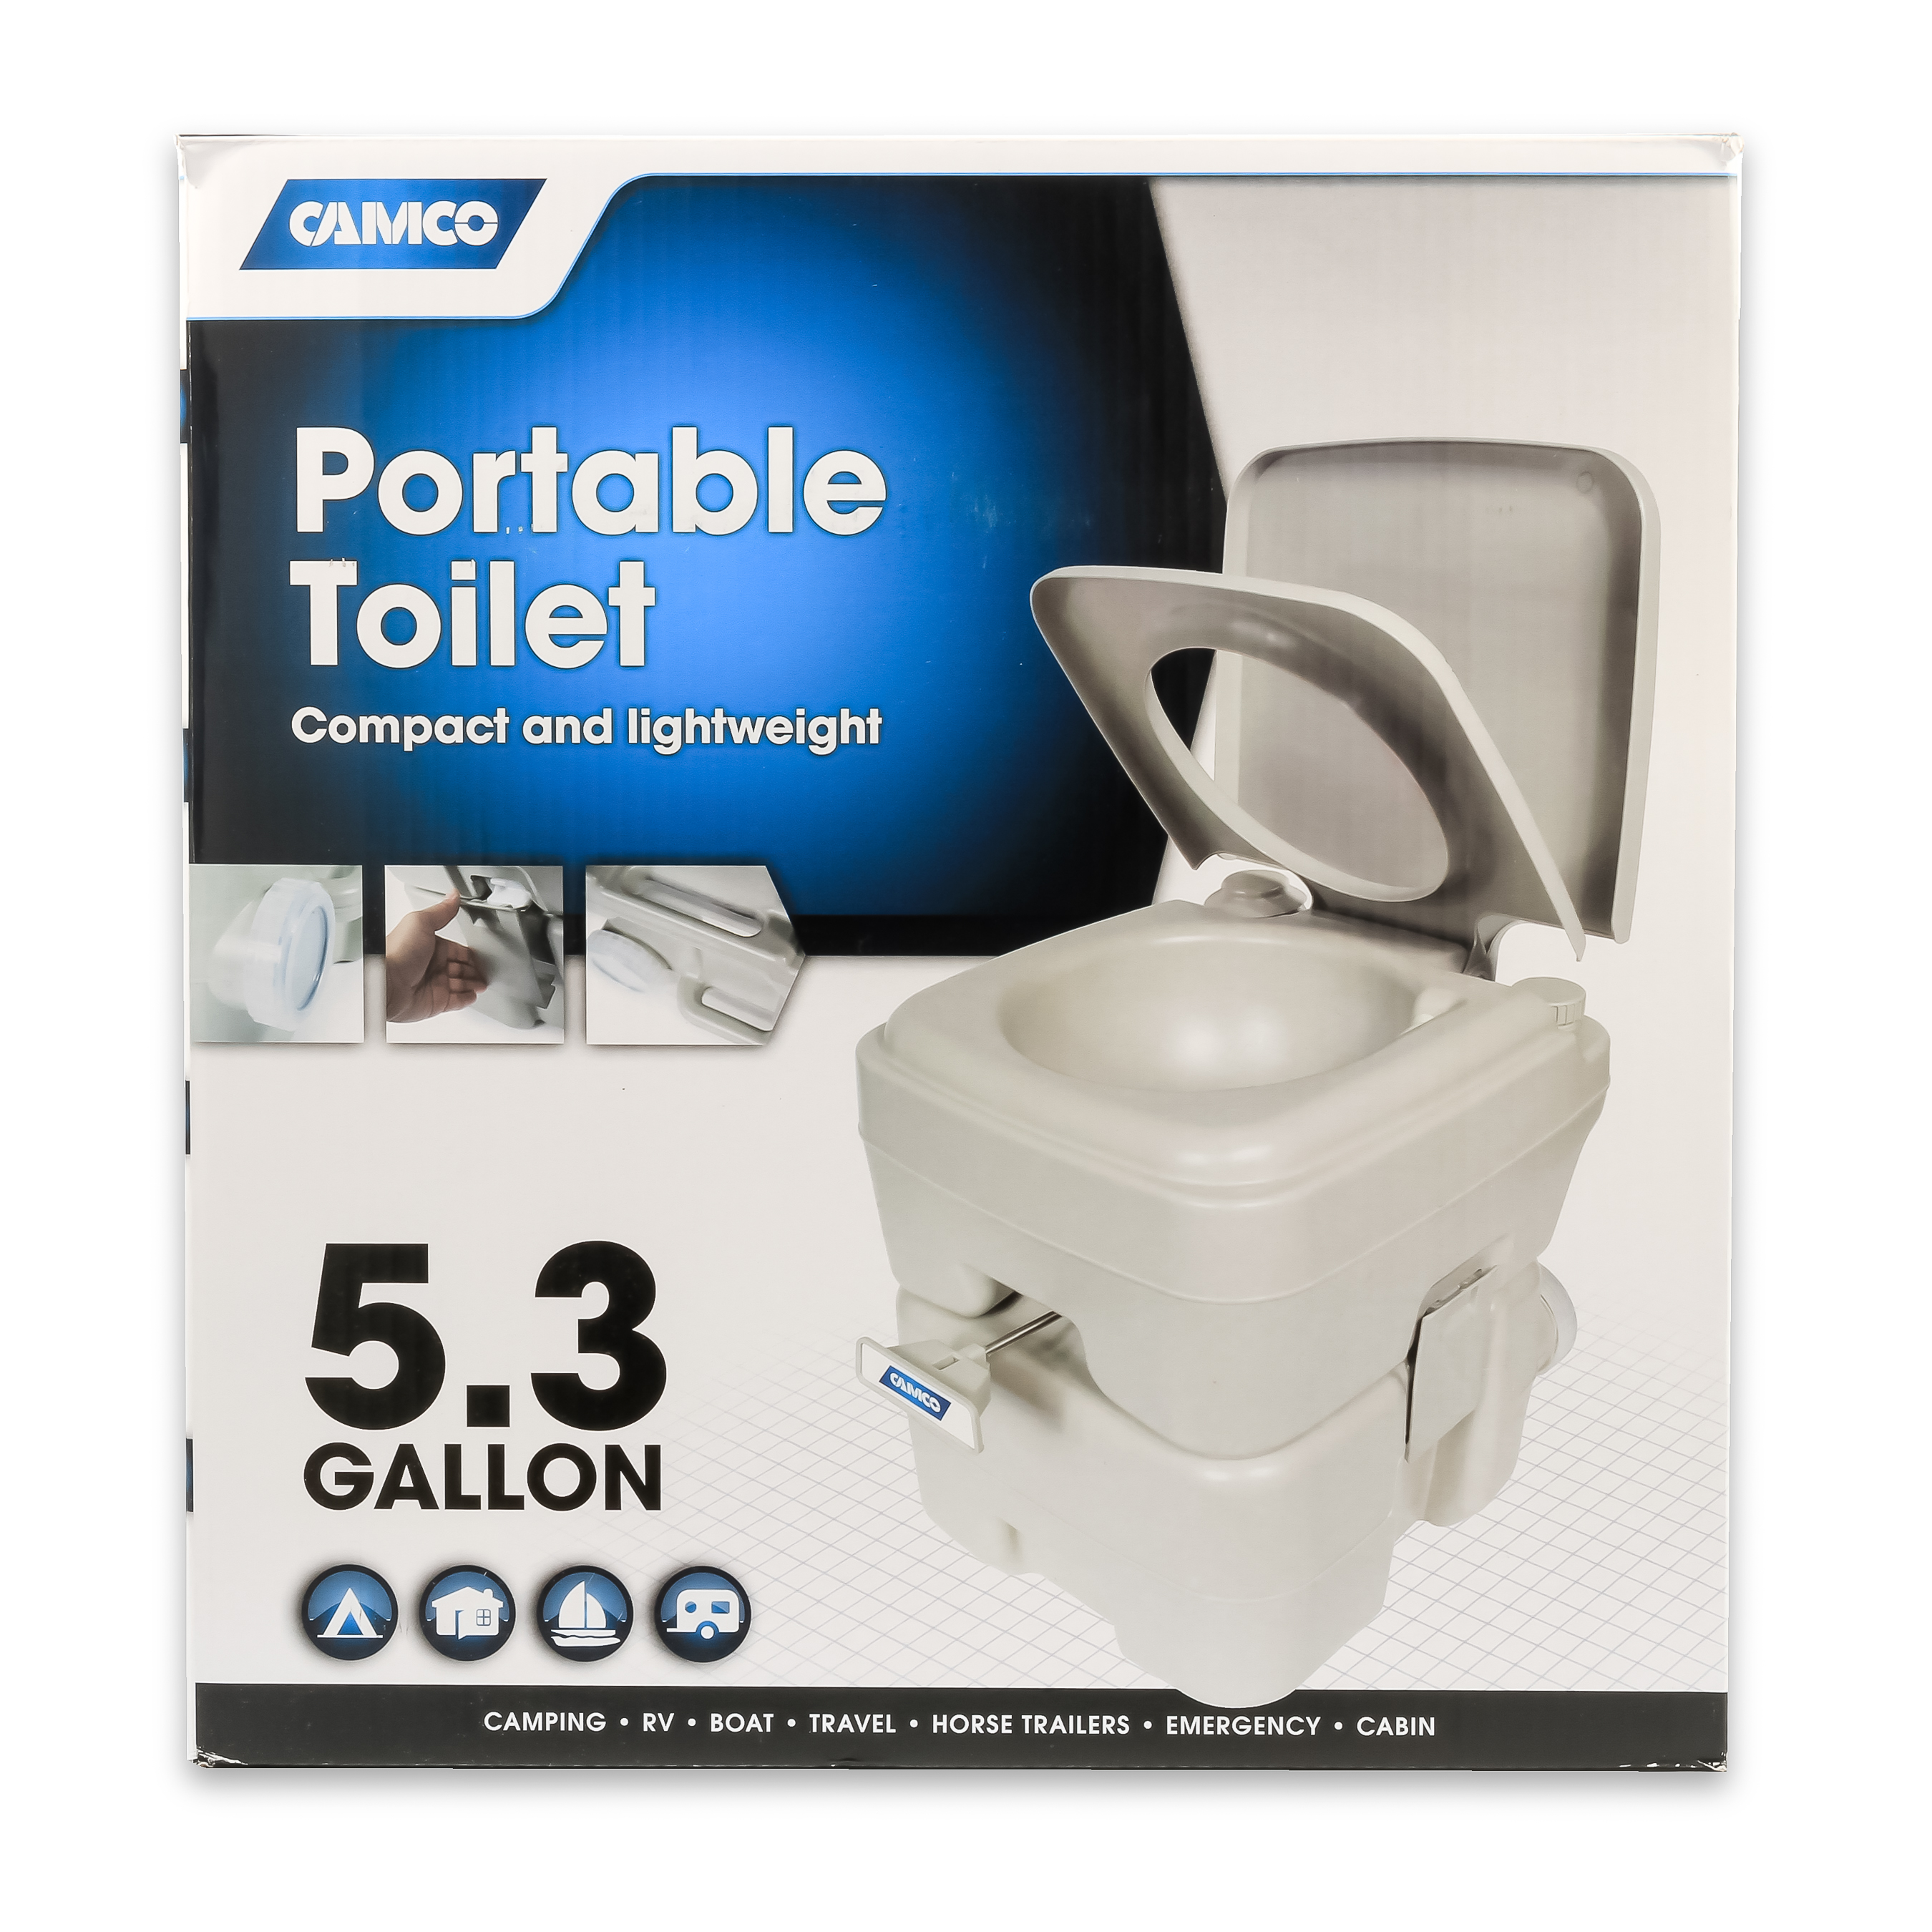 Camco 41541 Portable Toilet, 5.3 Gallon for RV, Camping, Boating and Outdoor - image 3 of 5